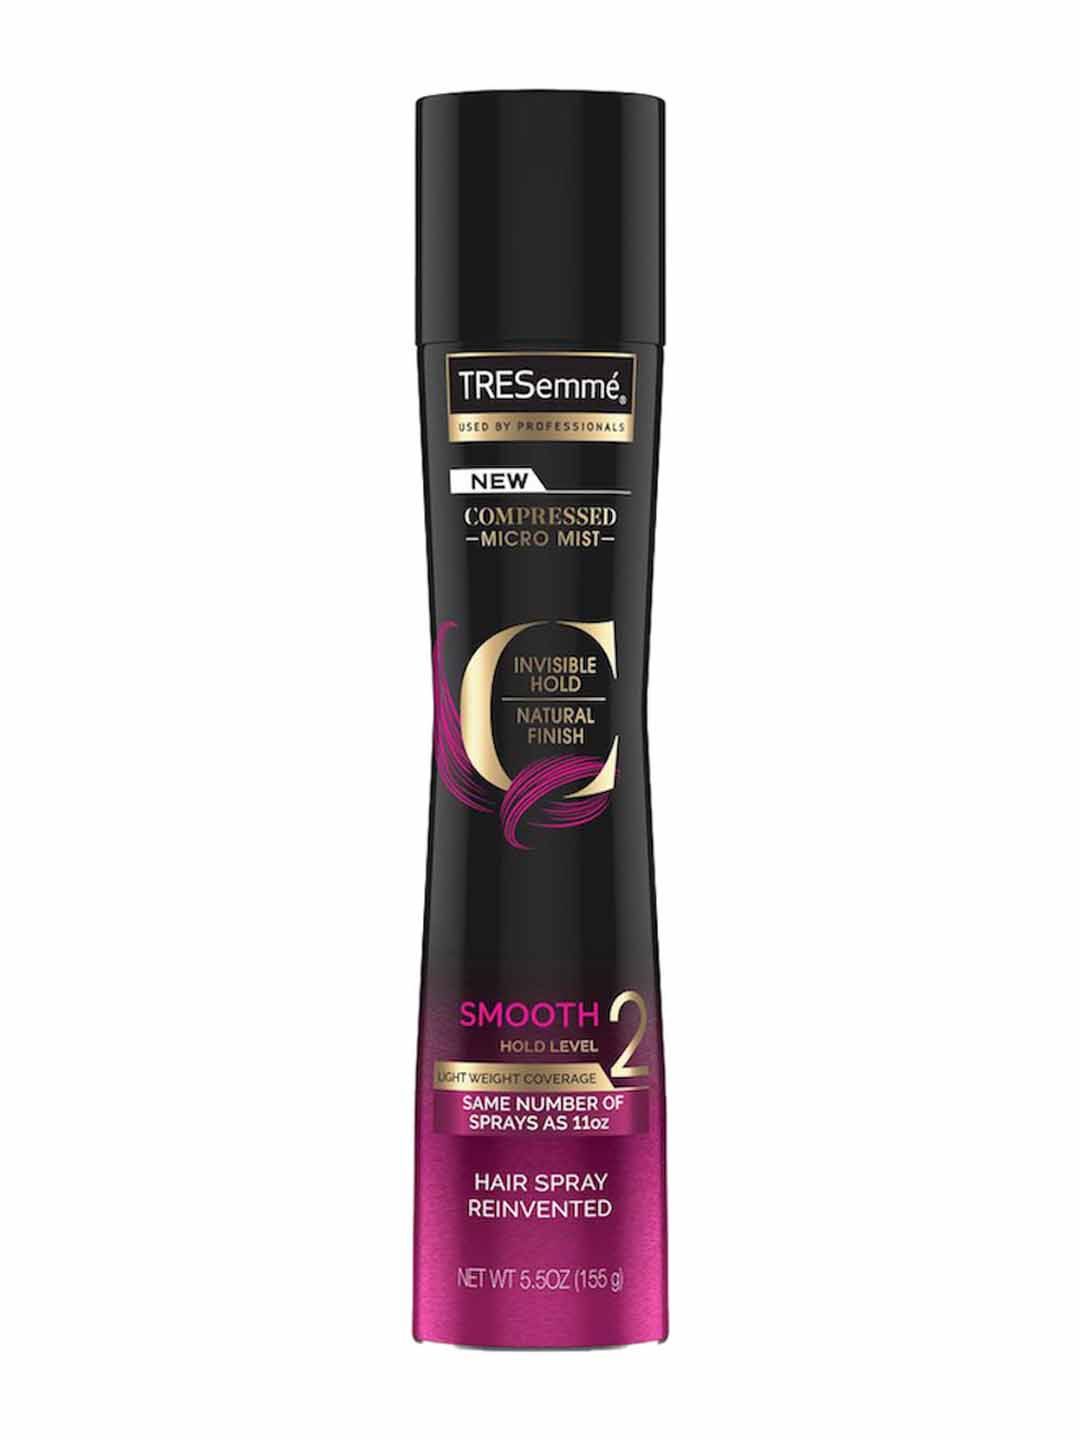 Tresemme Compressed Micro Mist Hair Spray, Extra Hold, Natural